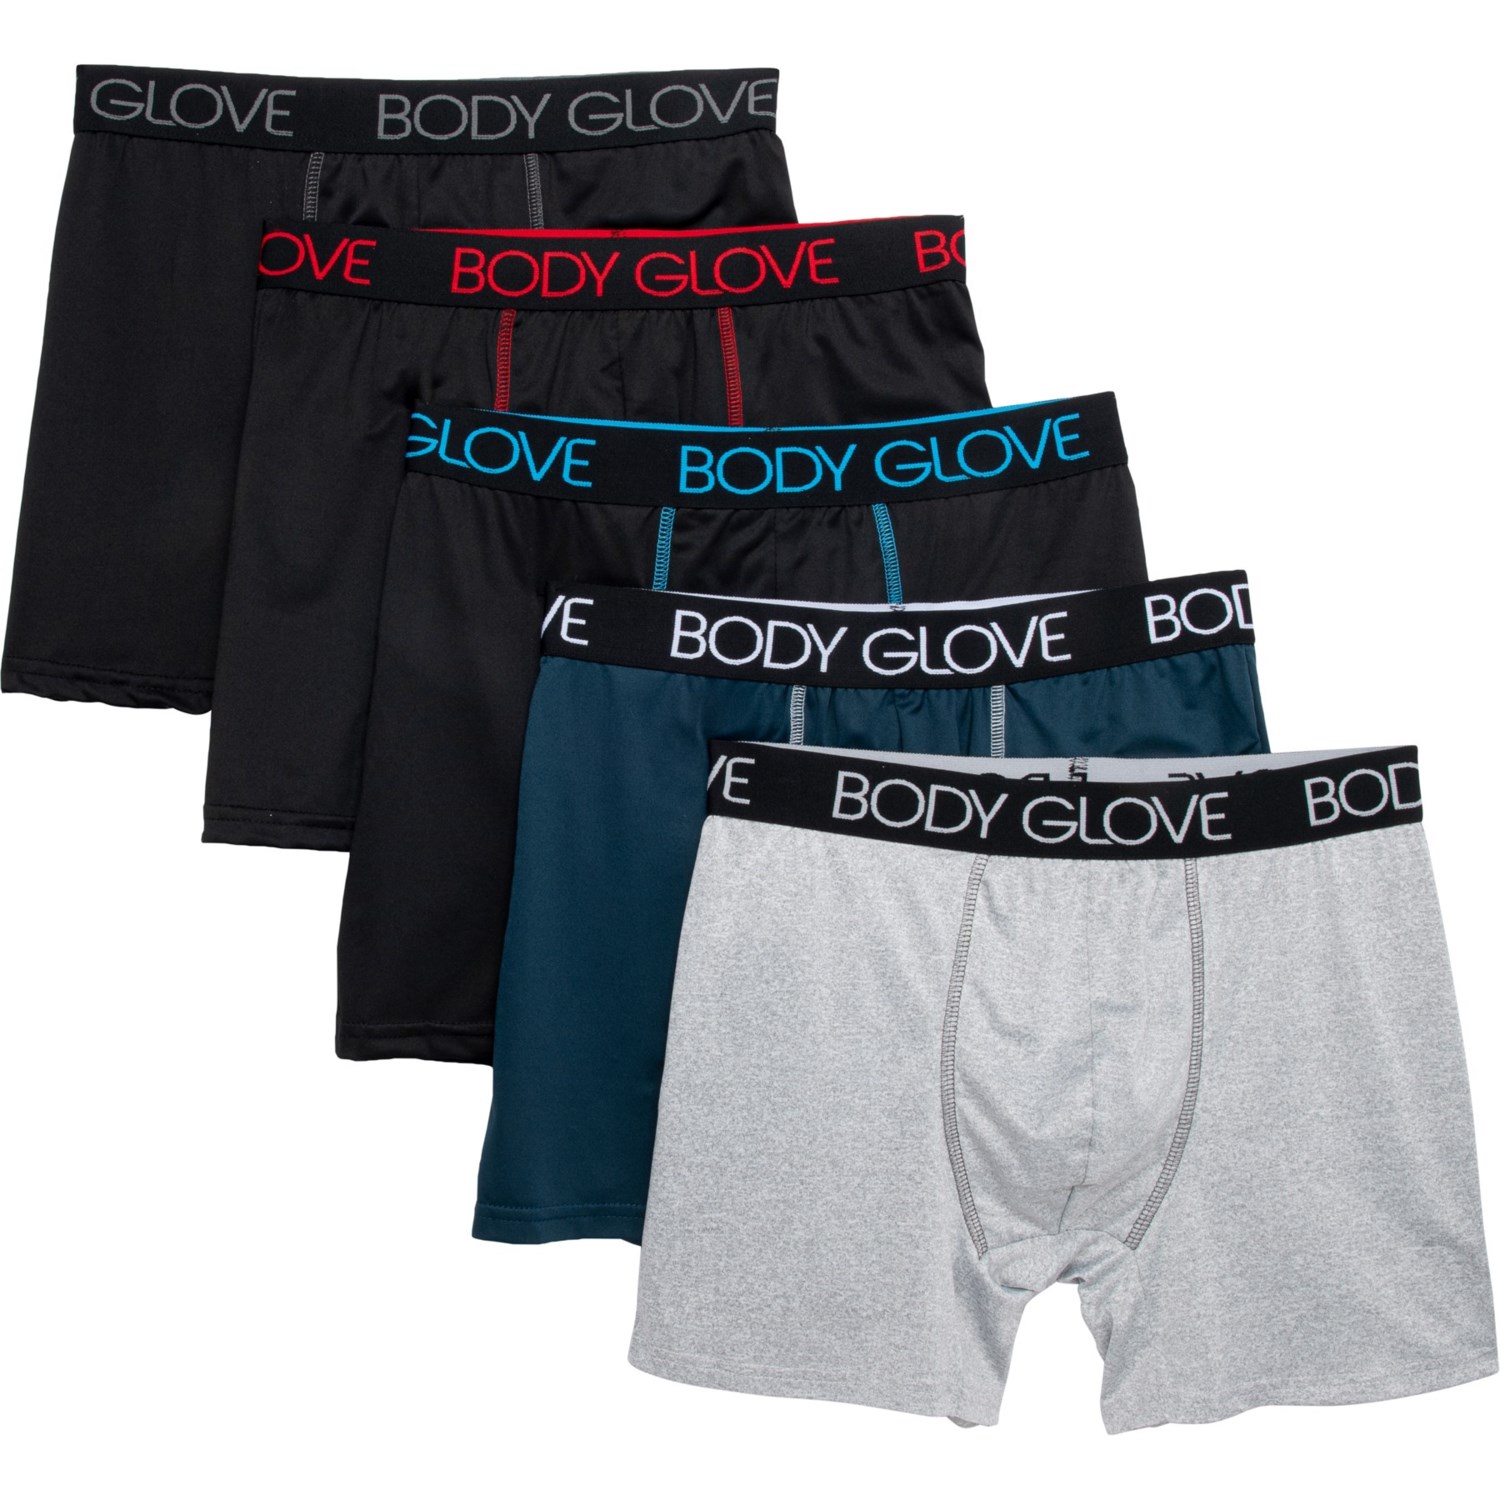 Body Glove High-Performance Boxer Briefs (For Men) - Save 60%